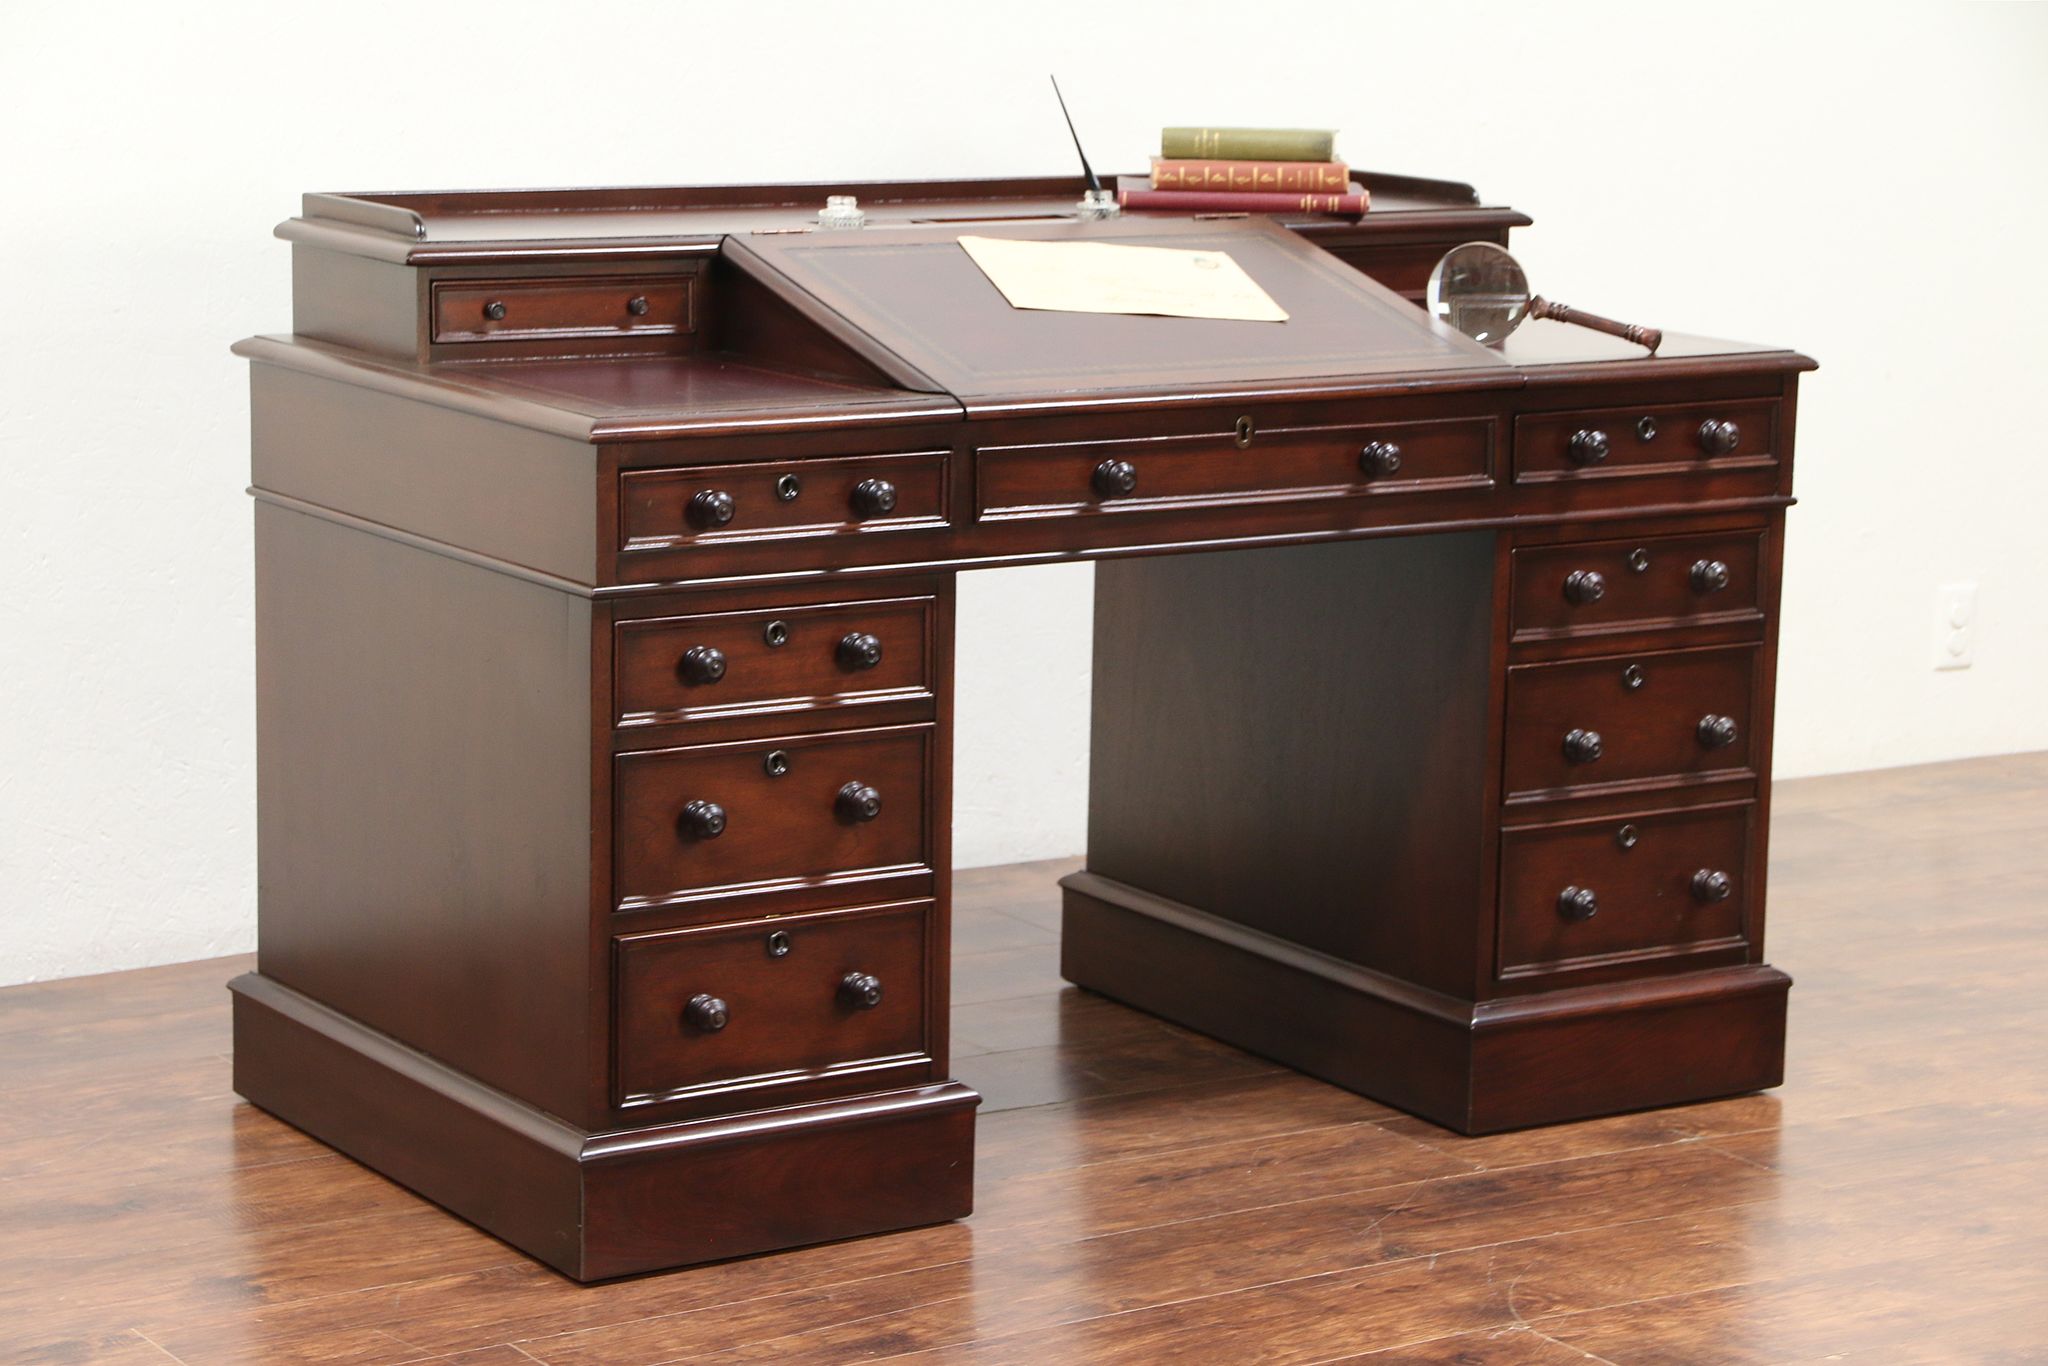 Sold Charles Dickens Replica Mahogany Desk Tooled Leather